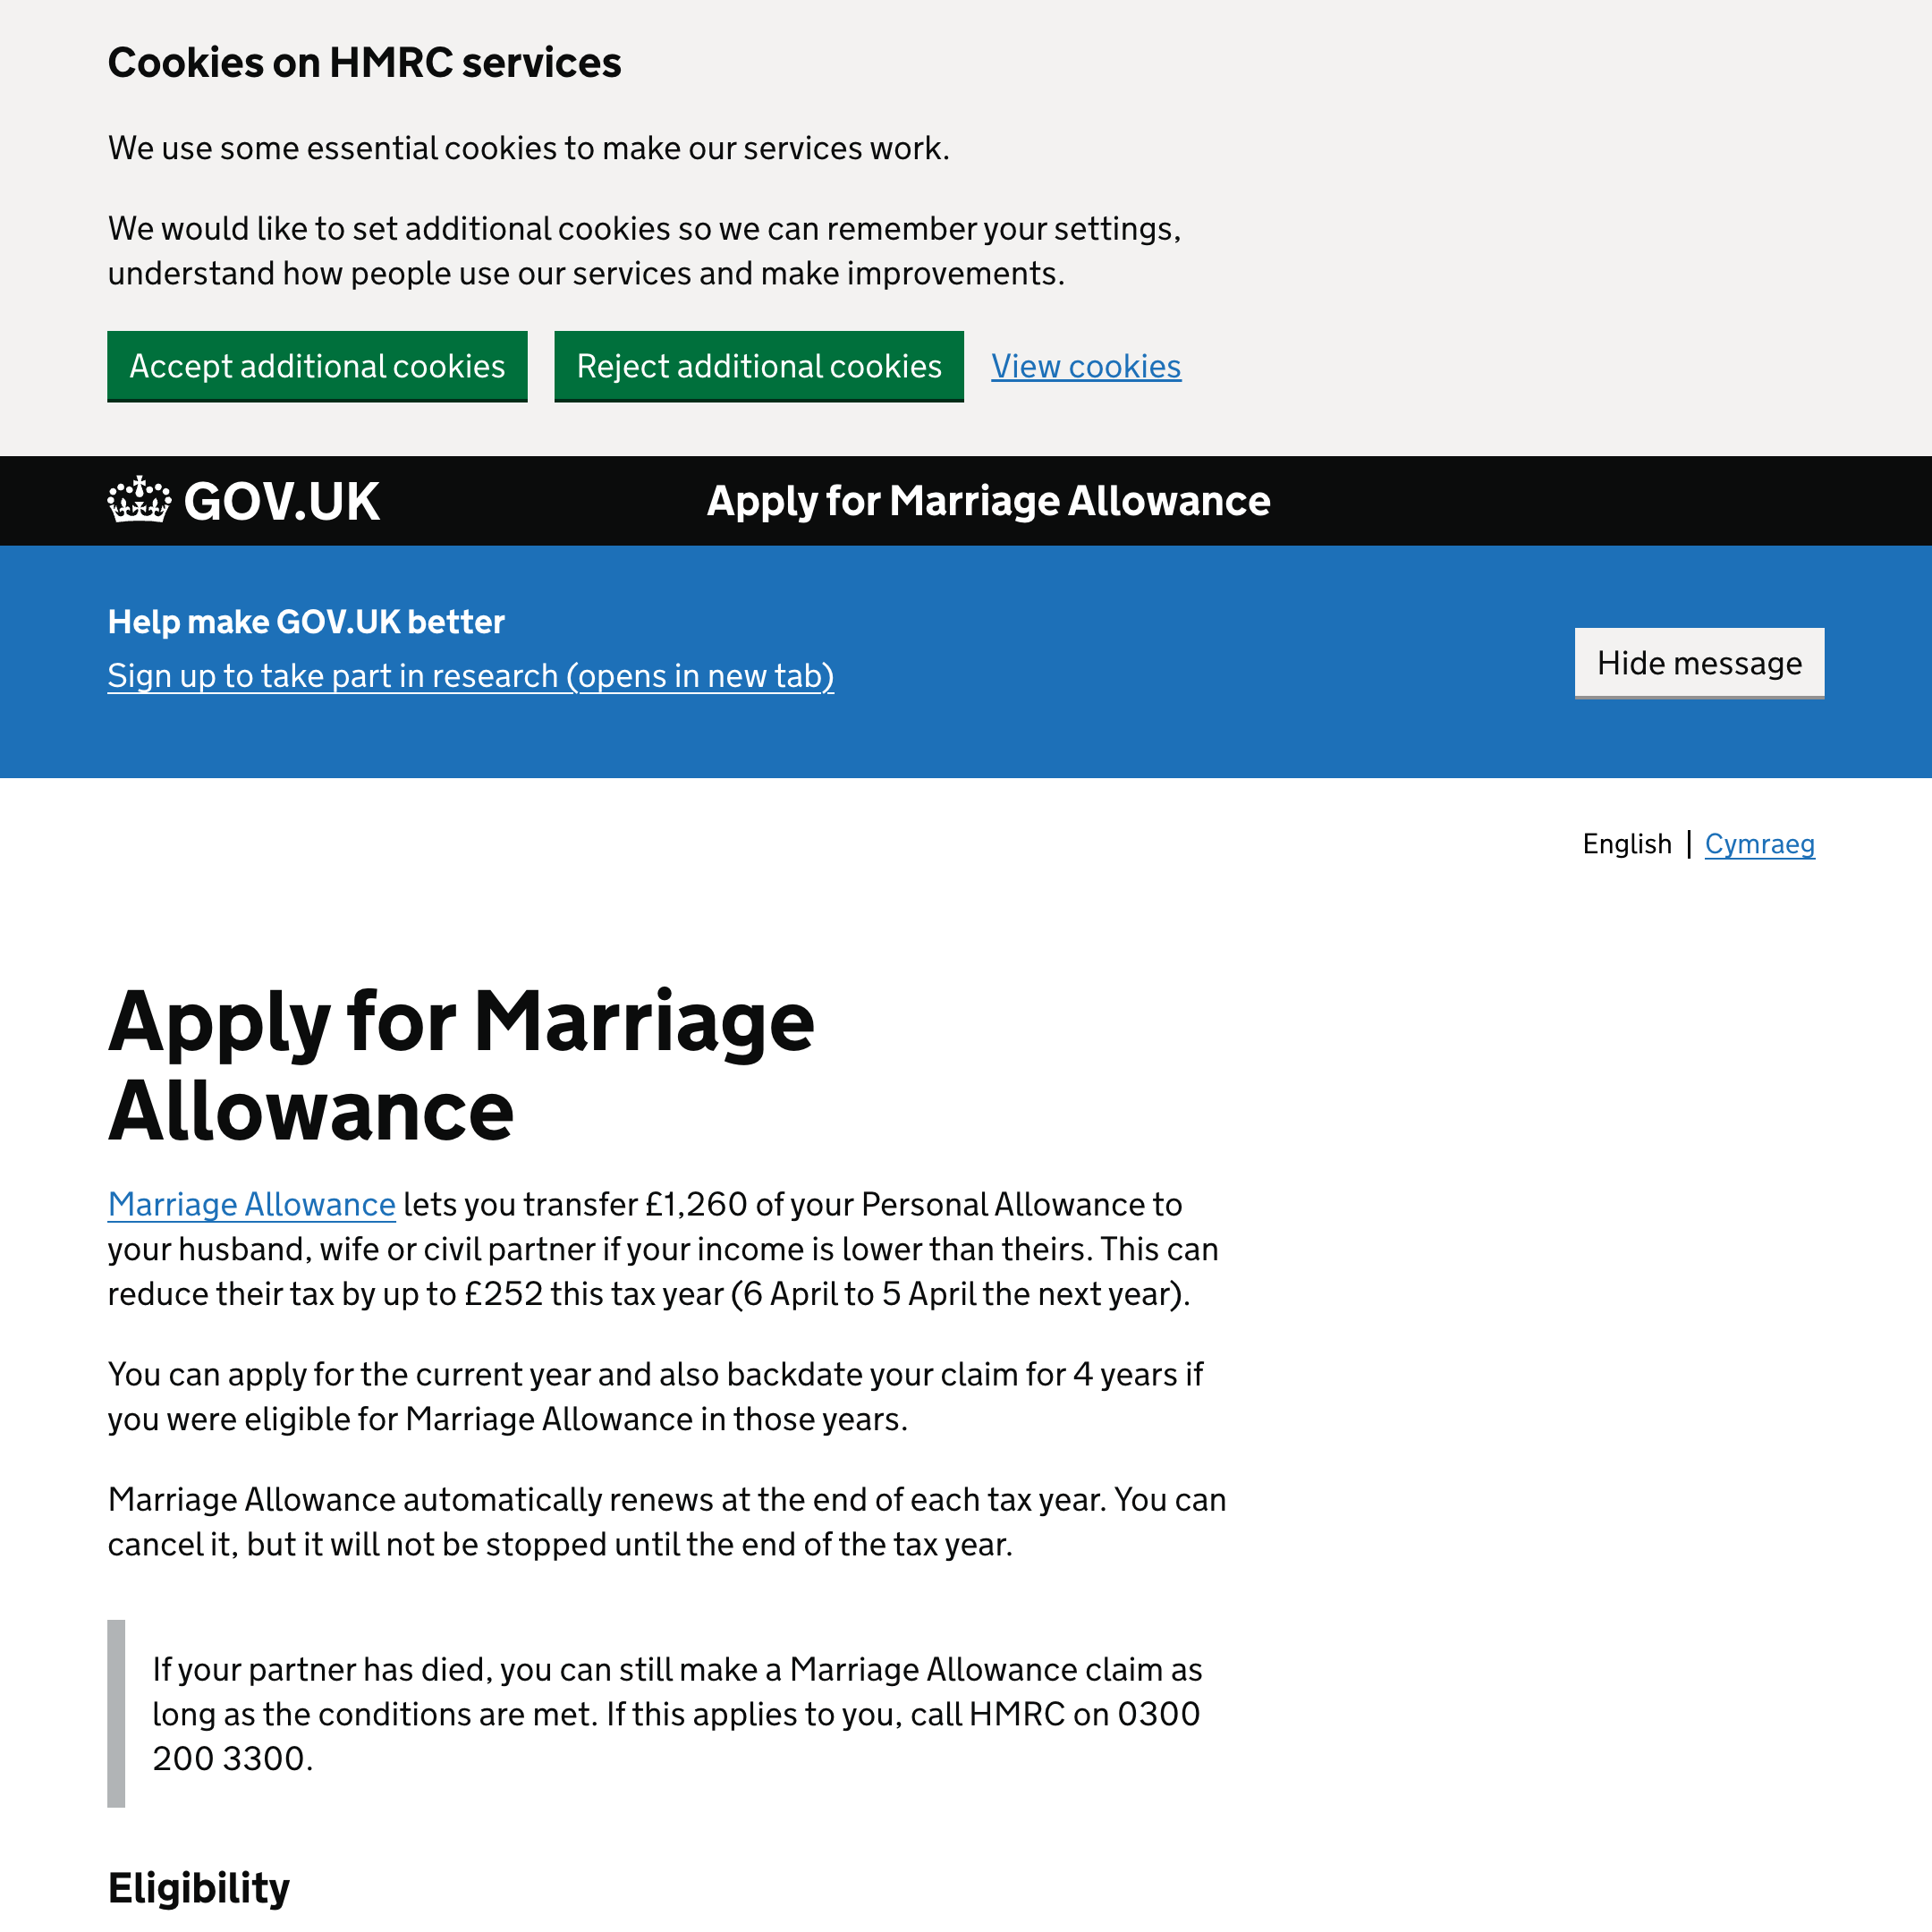 Apply for Marriage Allowance